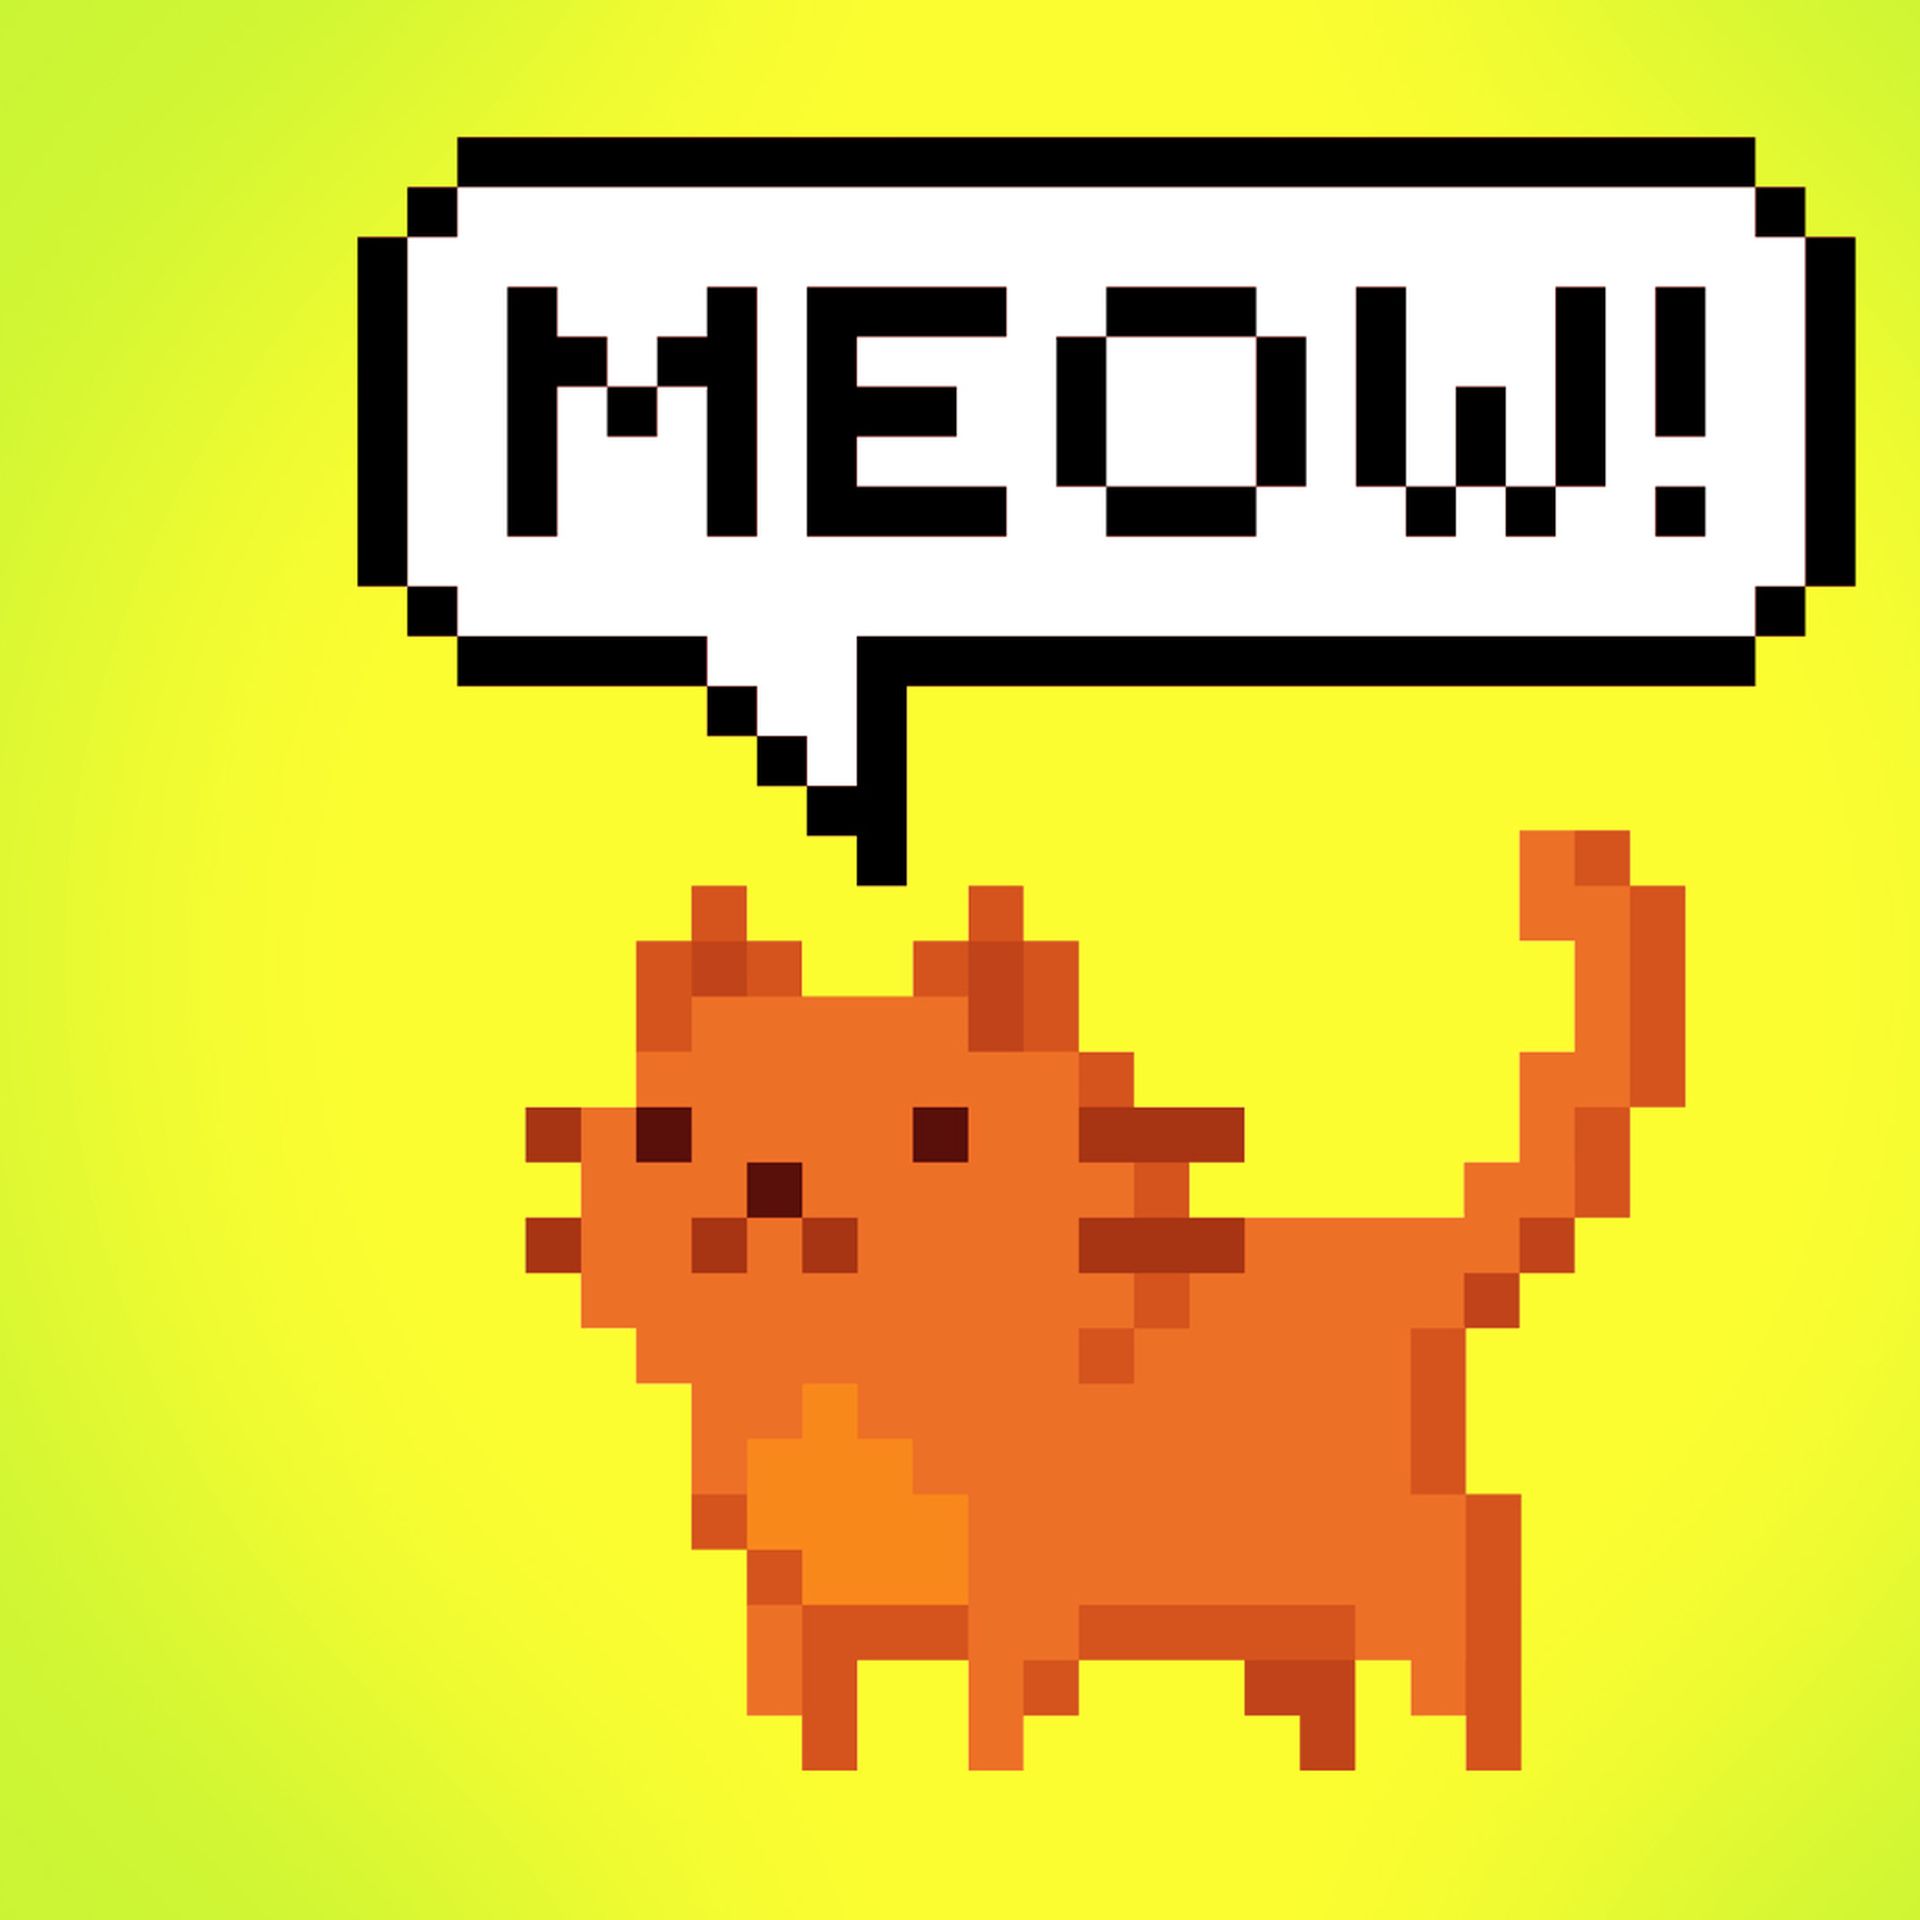 Illustration of a digital cat saying meow